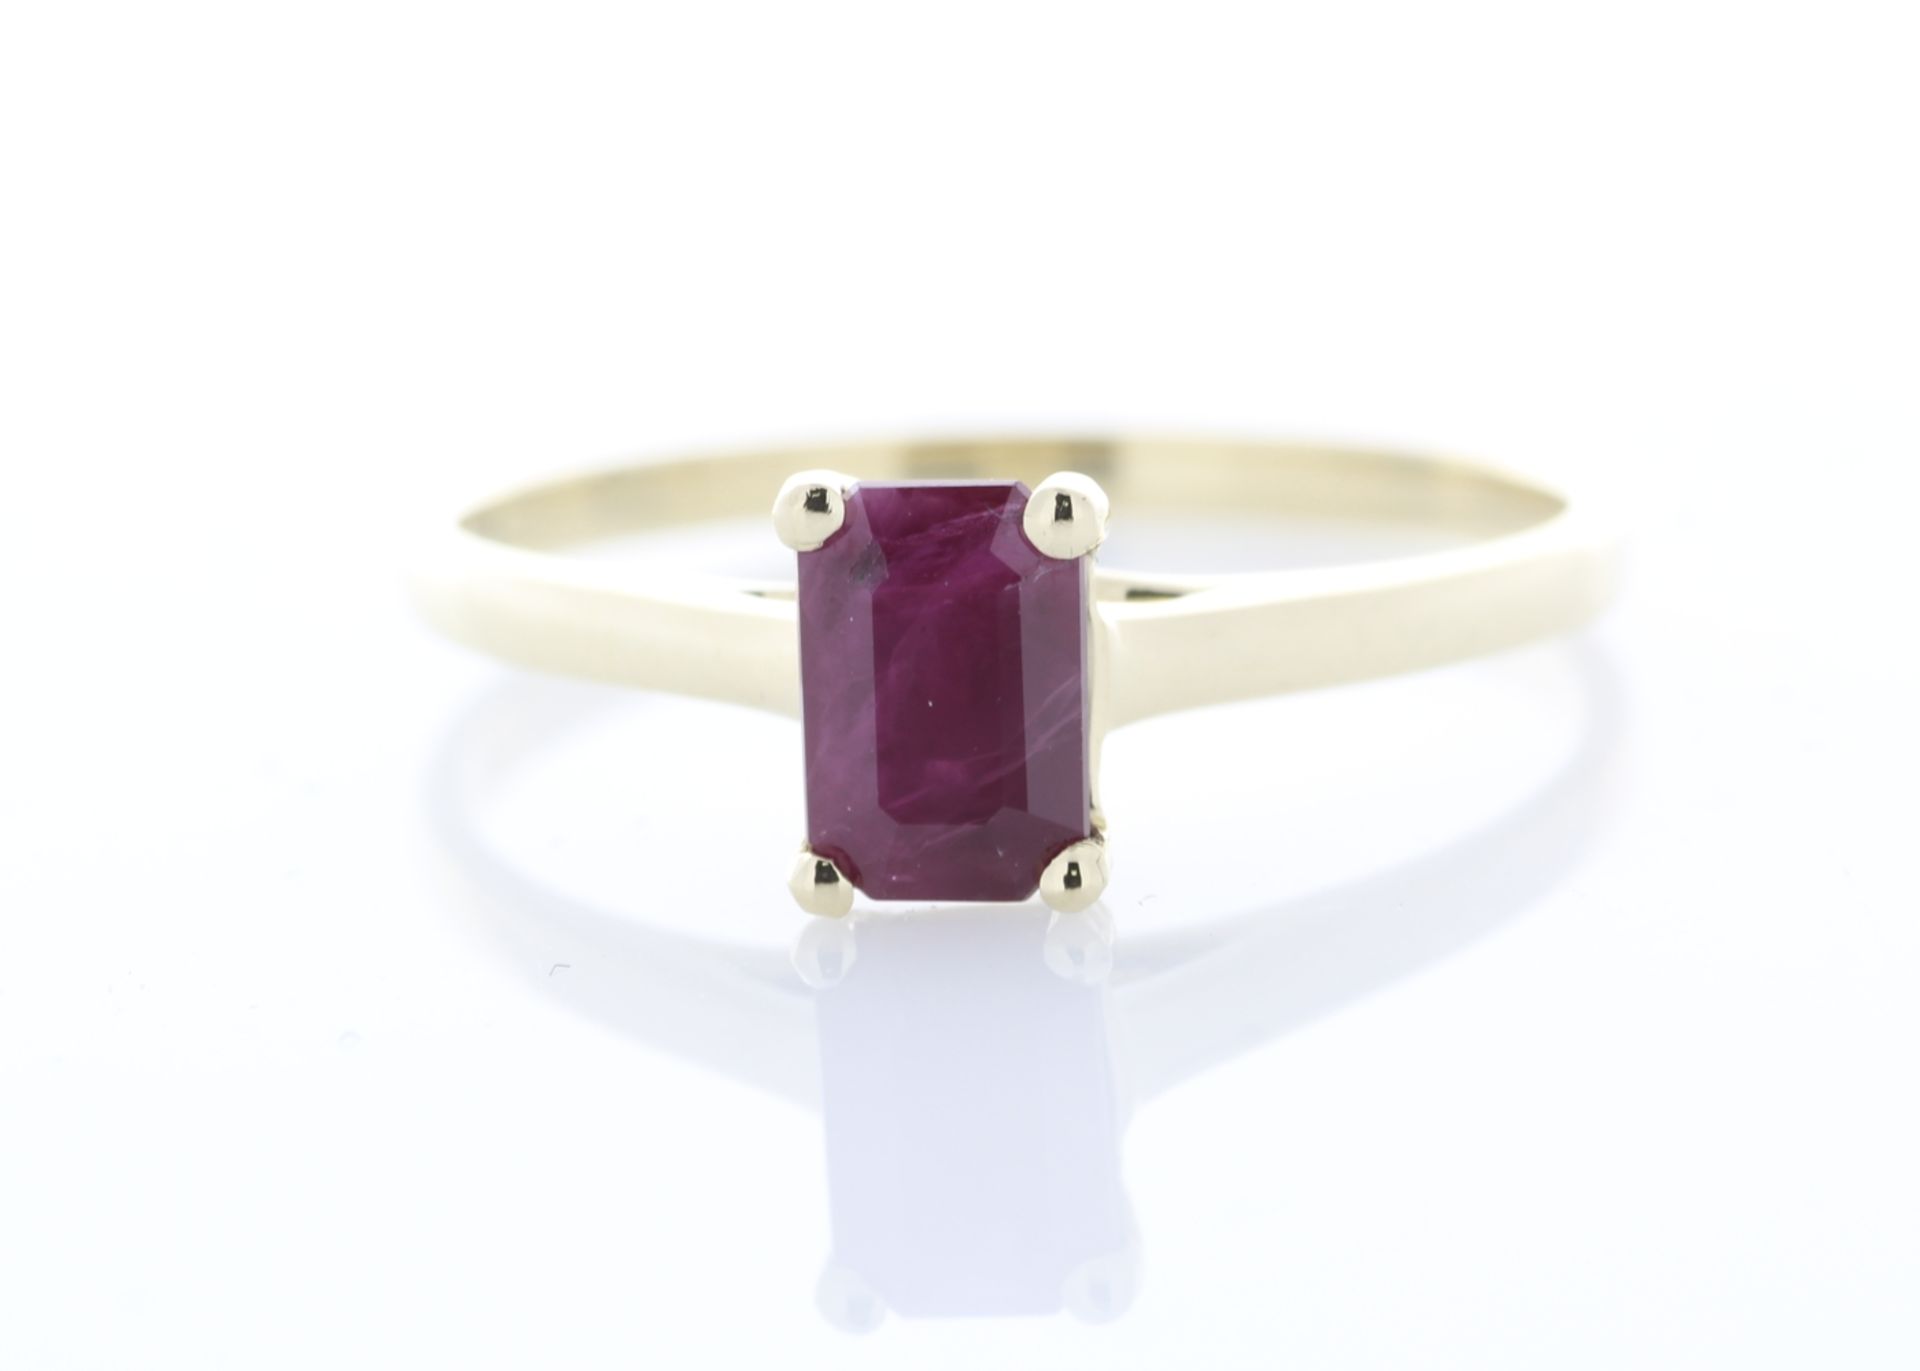 9ct Yellow Gold Single Stone Emerald Cut Ruby Ring 0.60 Carats - Valued By AGI £3,540.00 - A